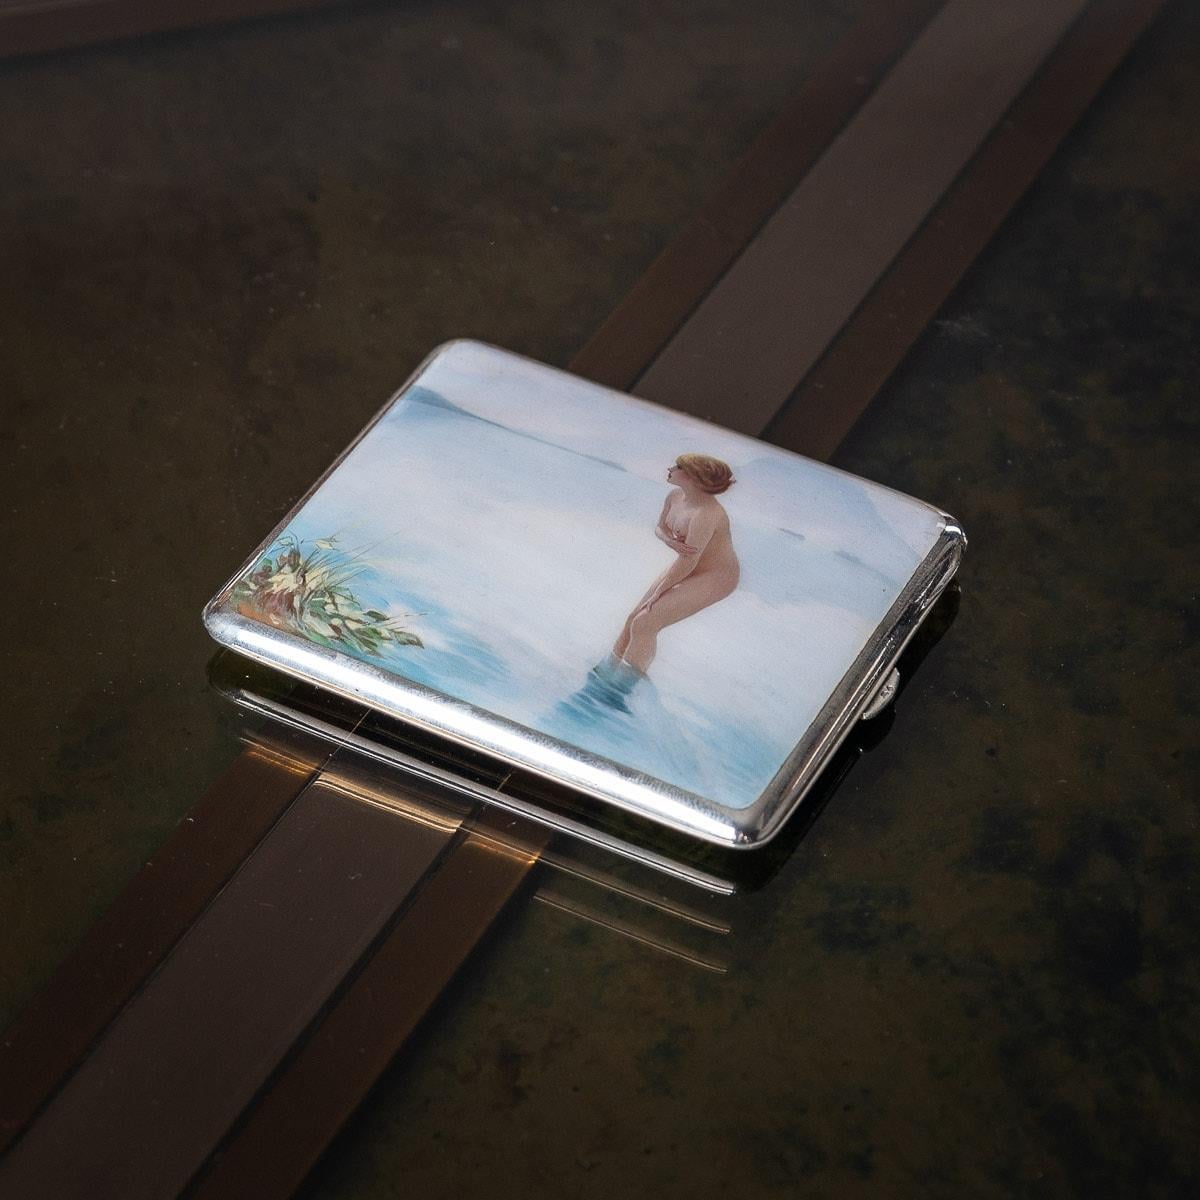 Antique early-20th Century German exceptional solid silver & enamel cigar case, rectangular hinged lid with rounded courners, decorated with a nude girl in a lake after the painting ‘Matinée de Septembre - September Morn’ by Paul Emile Chabas, A